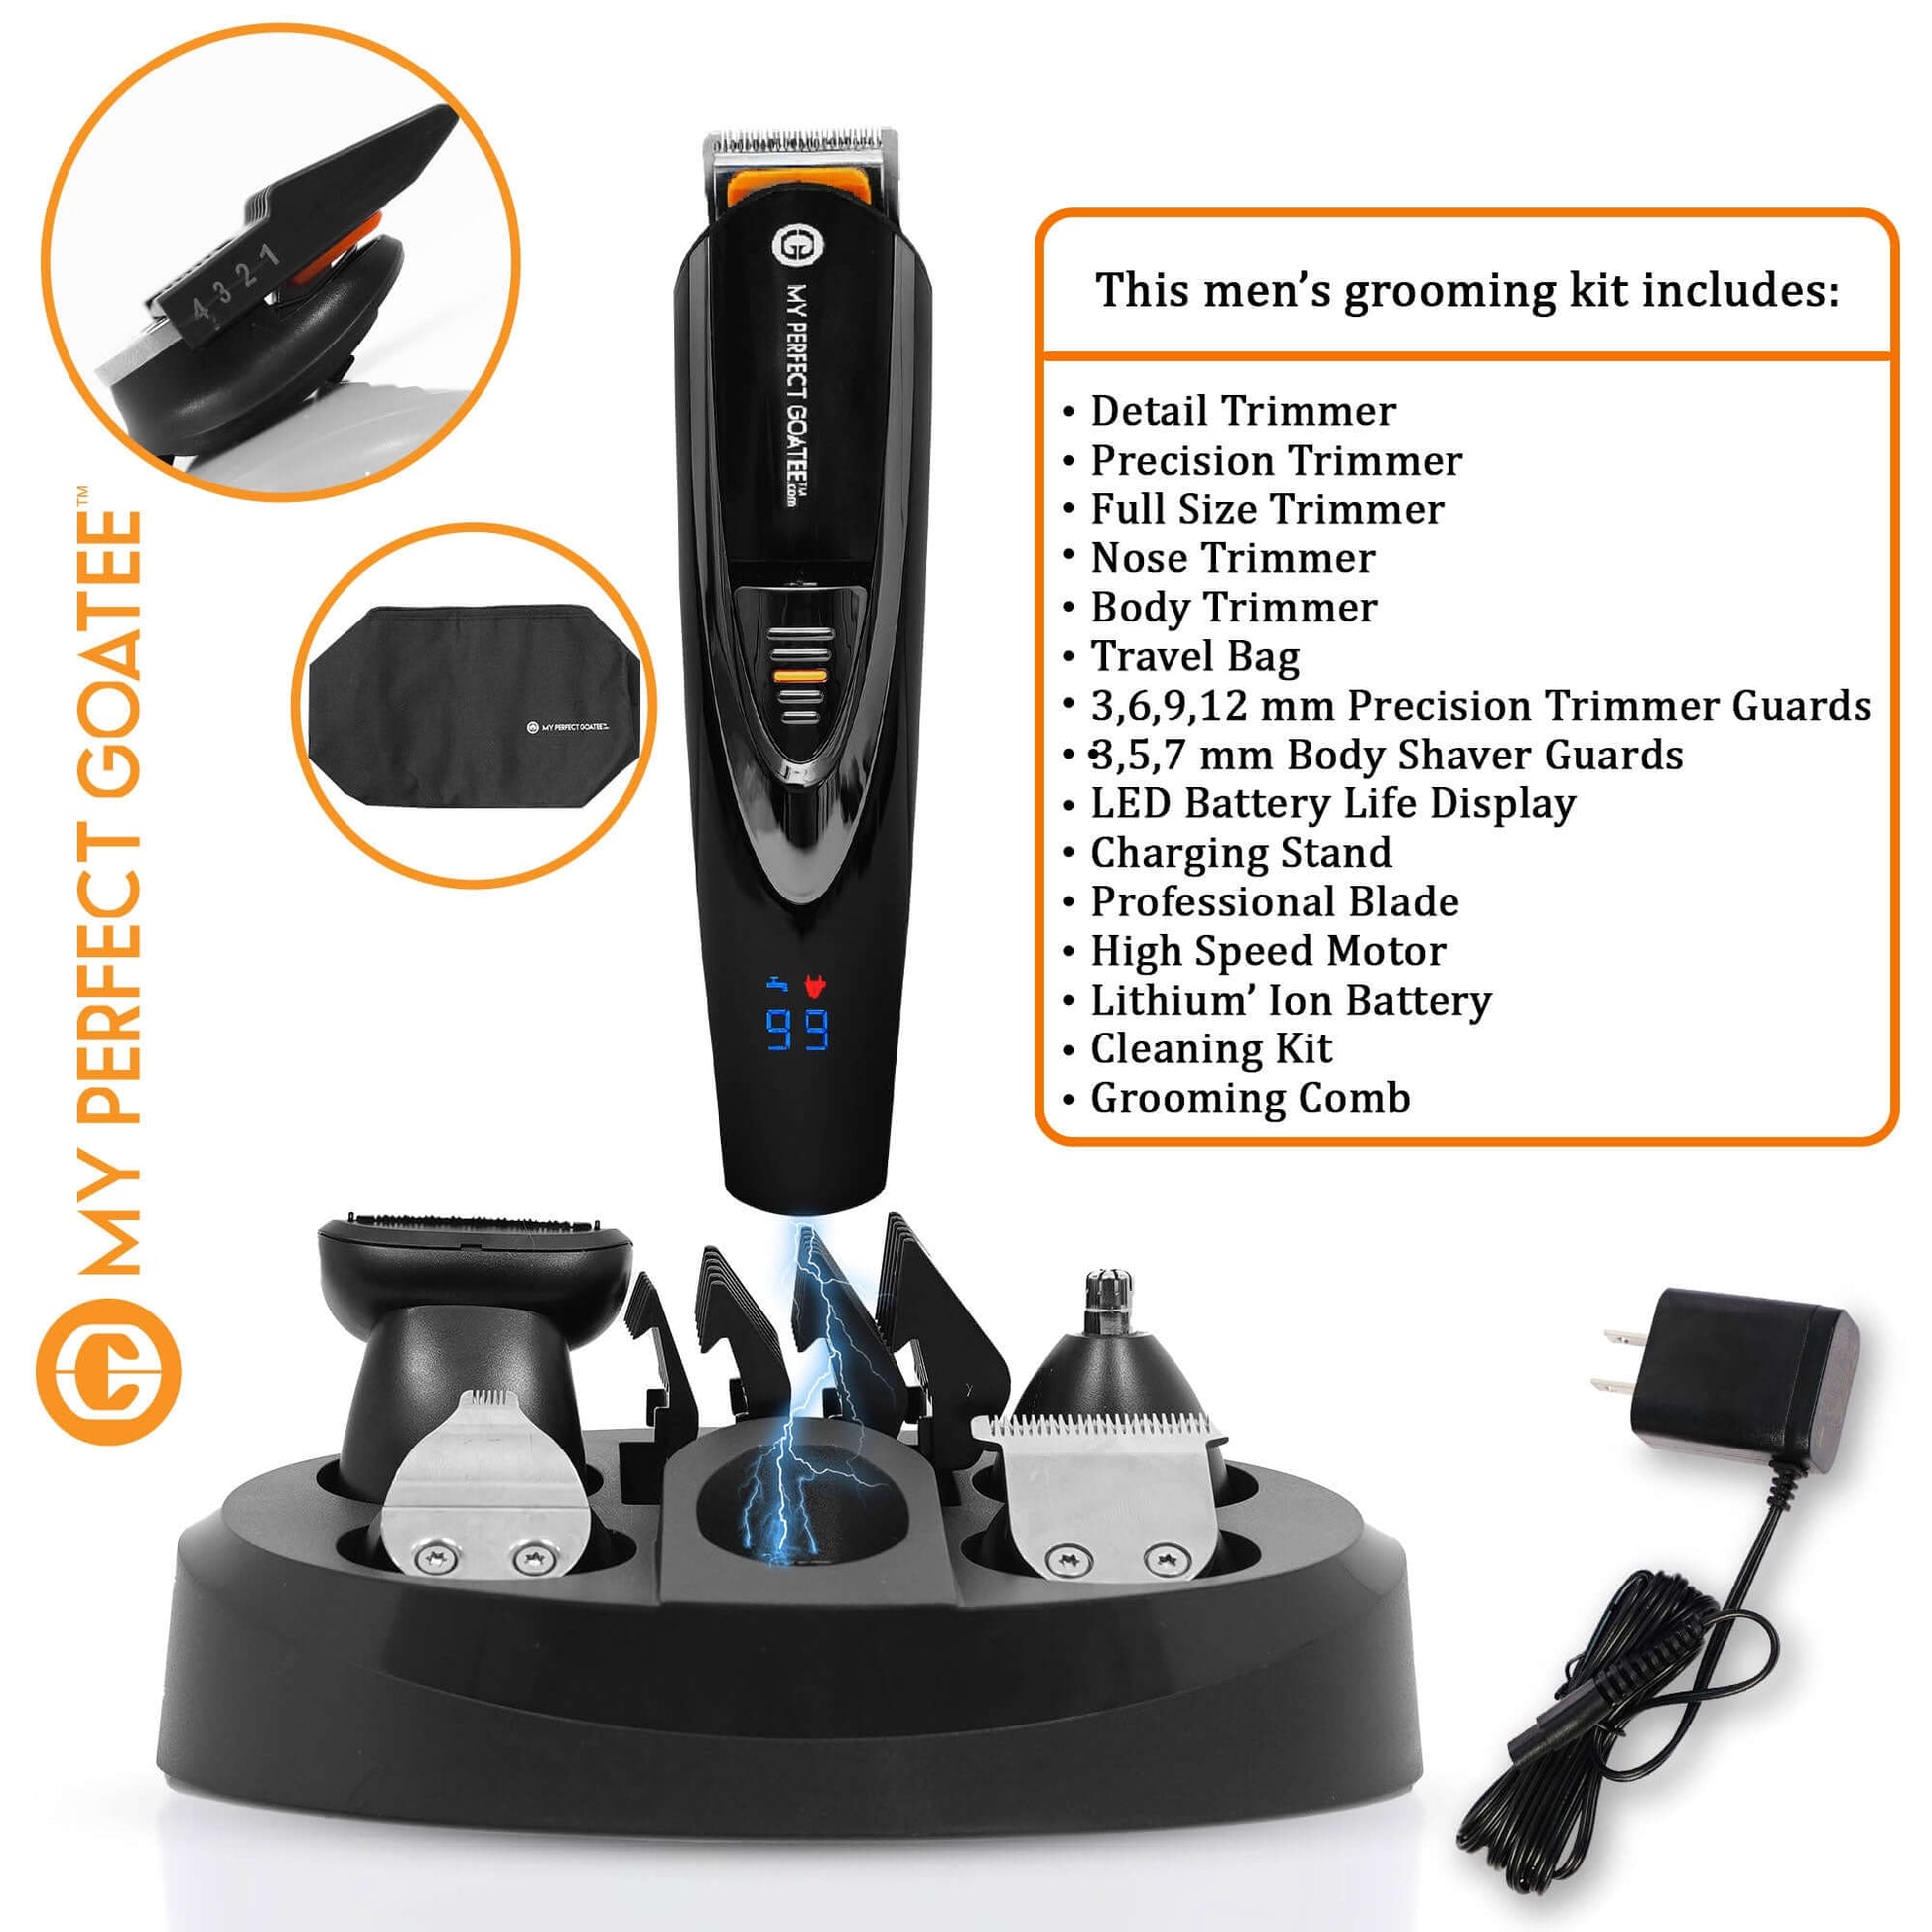 My Perfect Goatee® Beard Trimmer package, highlighting its included contents and features